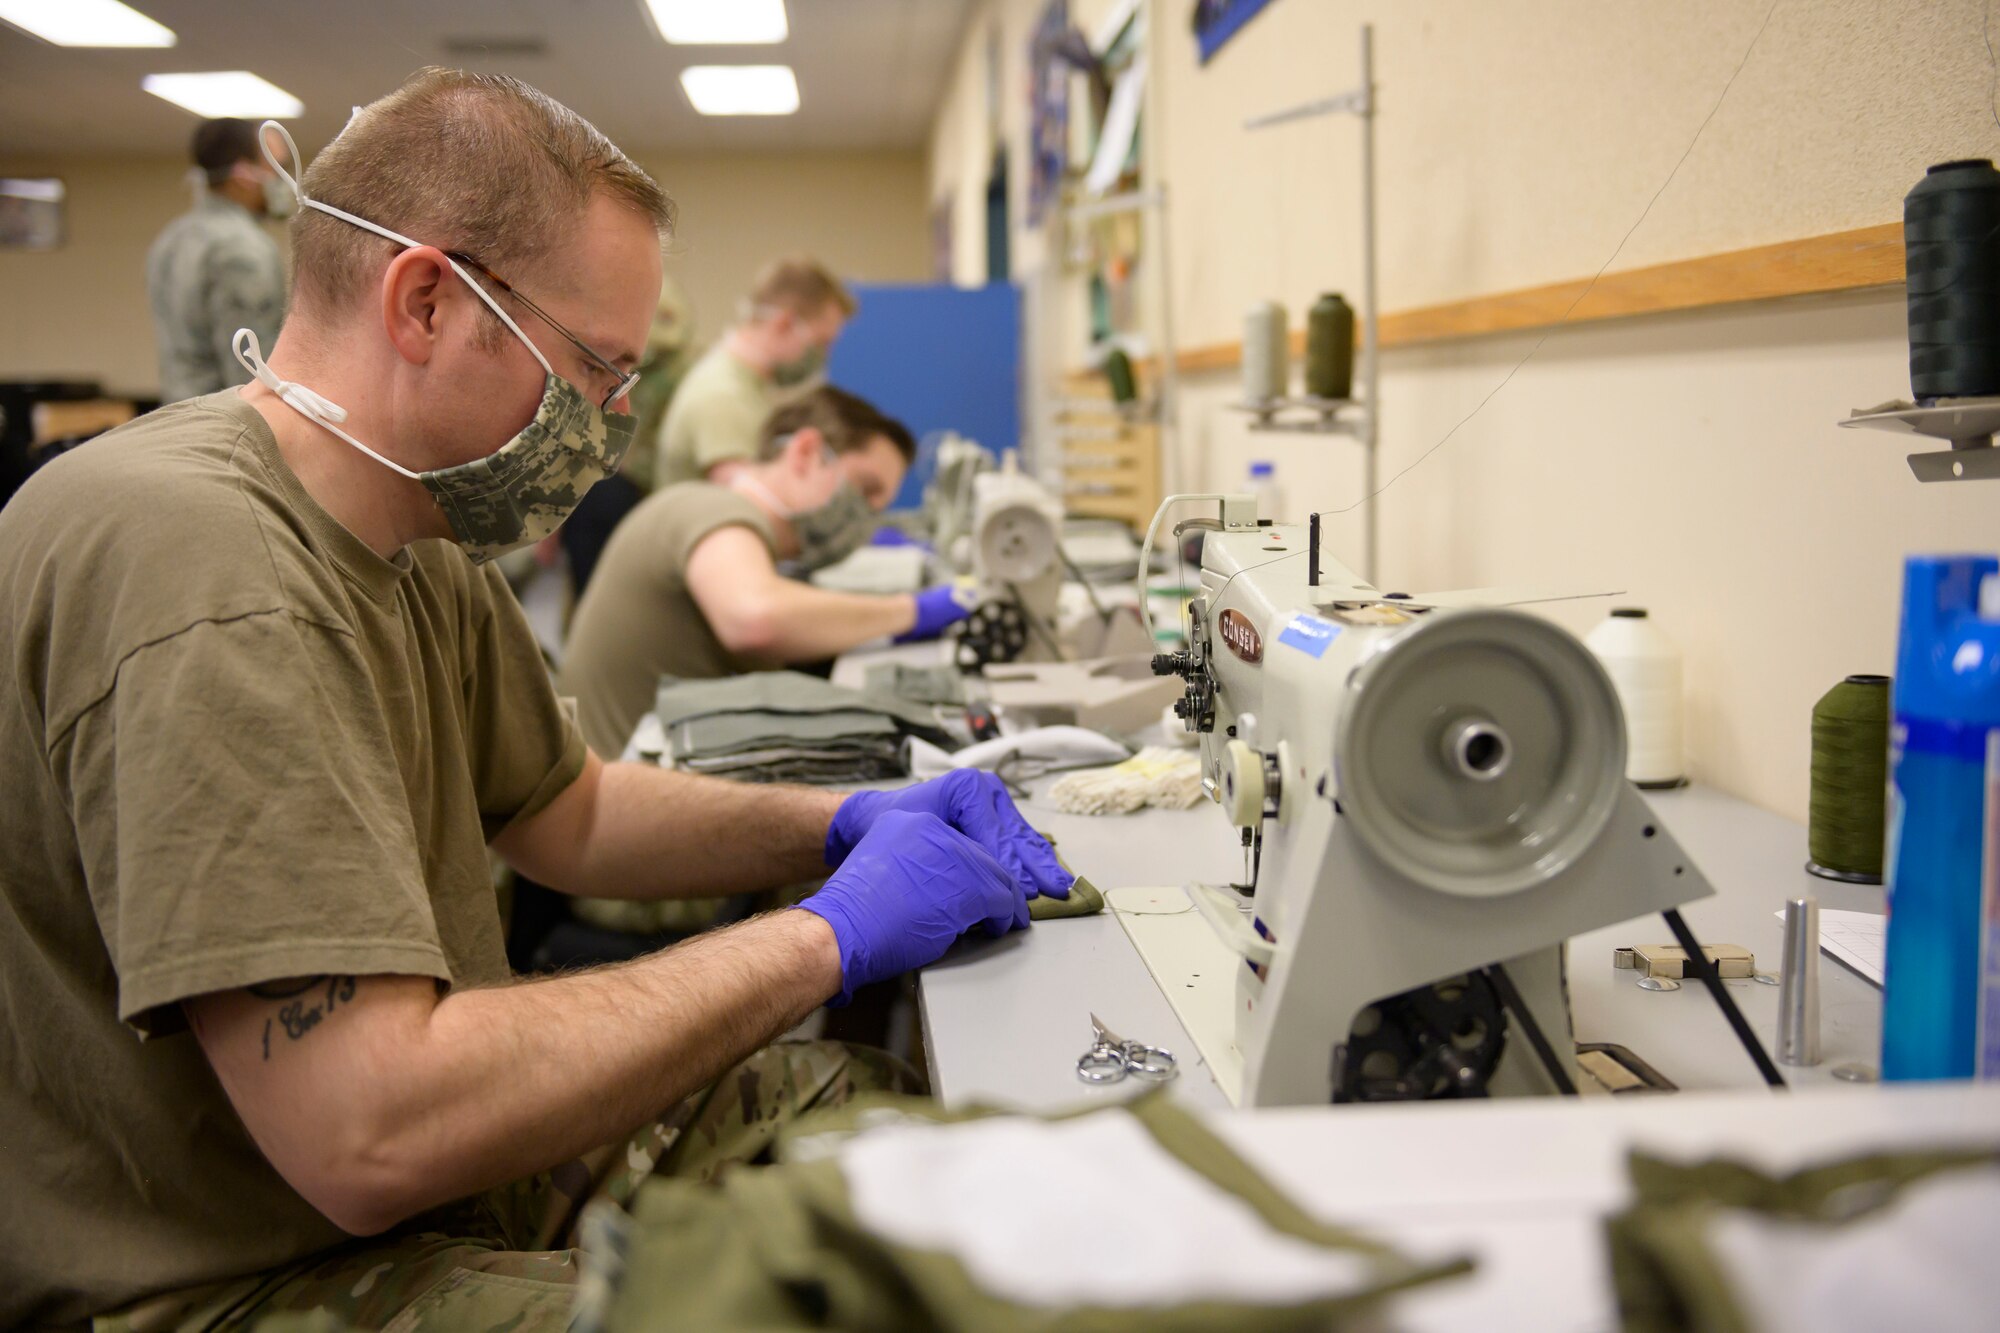 Master Sgt. Douglas Reedy, 366th Operations Support Squadron Aircrew Flight Equipment flight chief, sews cloth masks together, March, 7, 2020, at Mountain Home Air Force Base. All hands were on deck to craft over 500 cloth masks for personnel on base. (U.S. Air Force photo by Senior Airman Tyrell Hall)